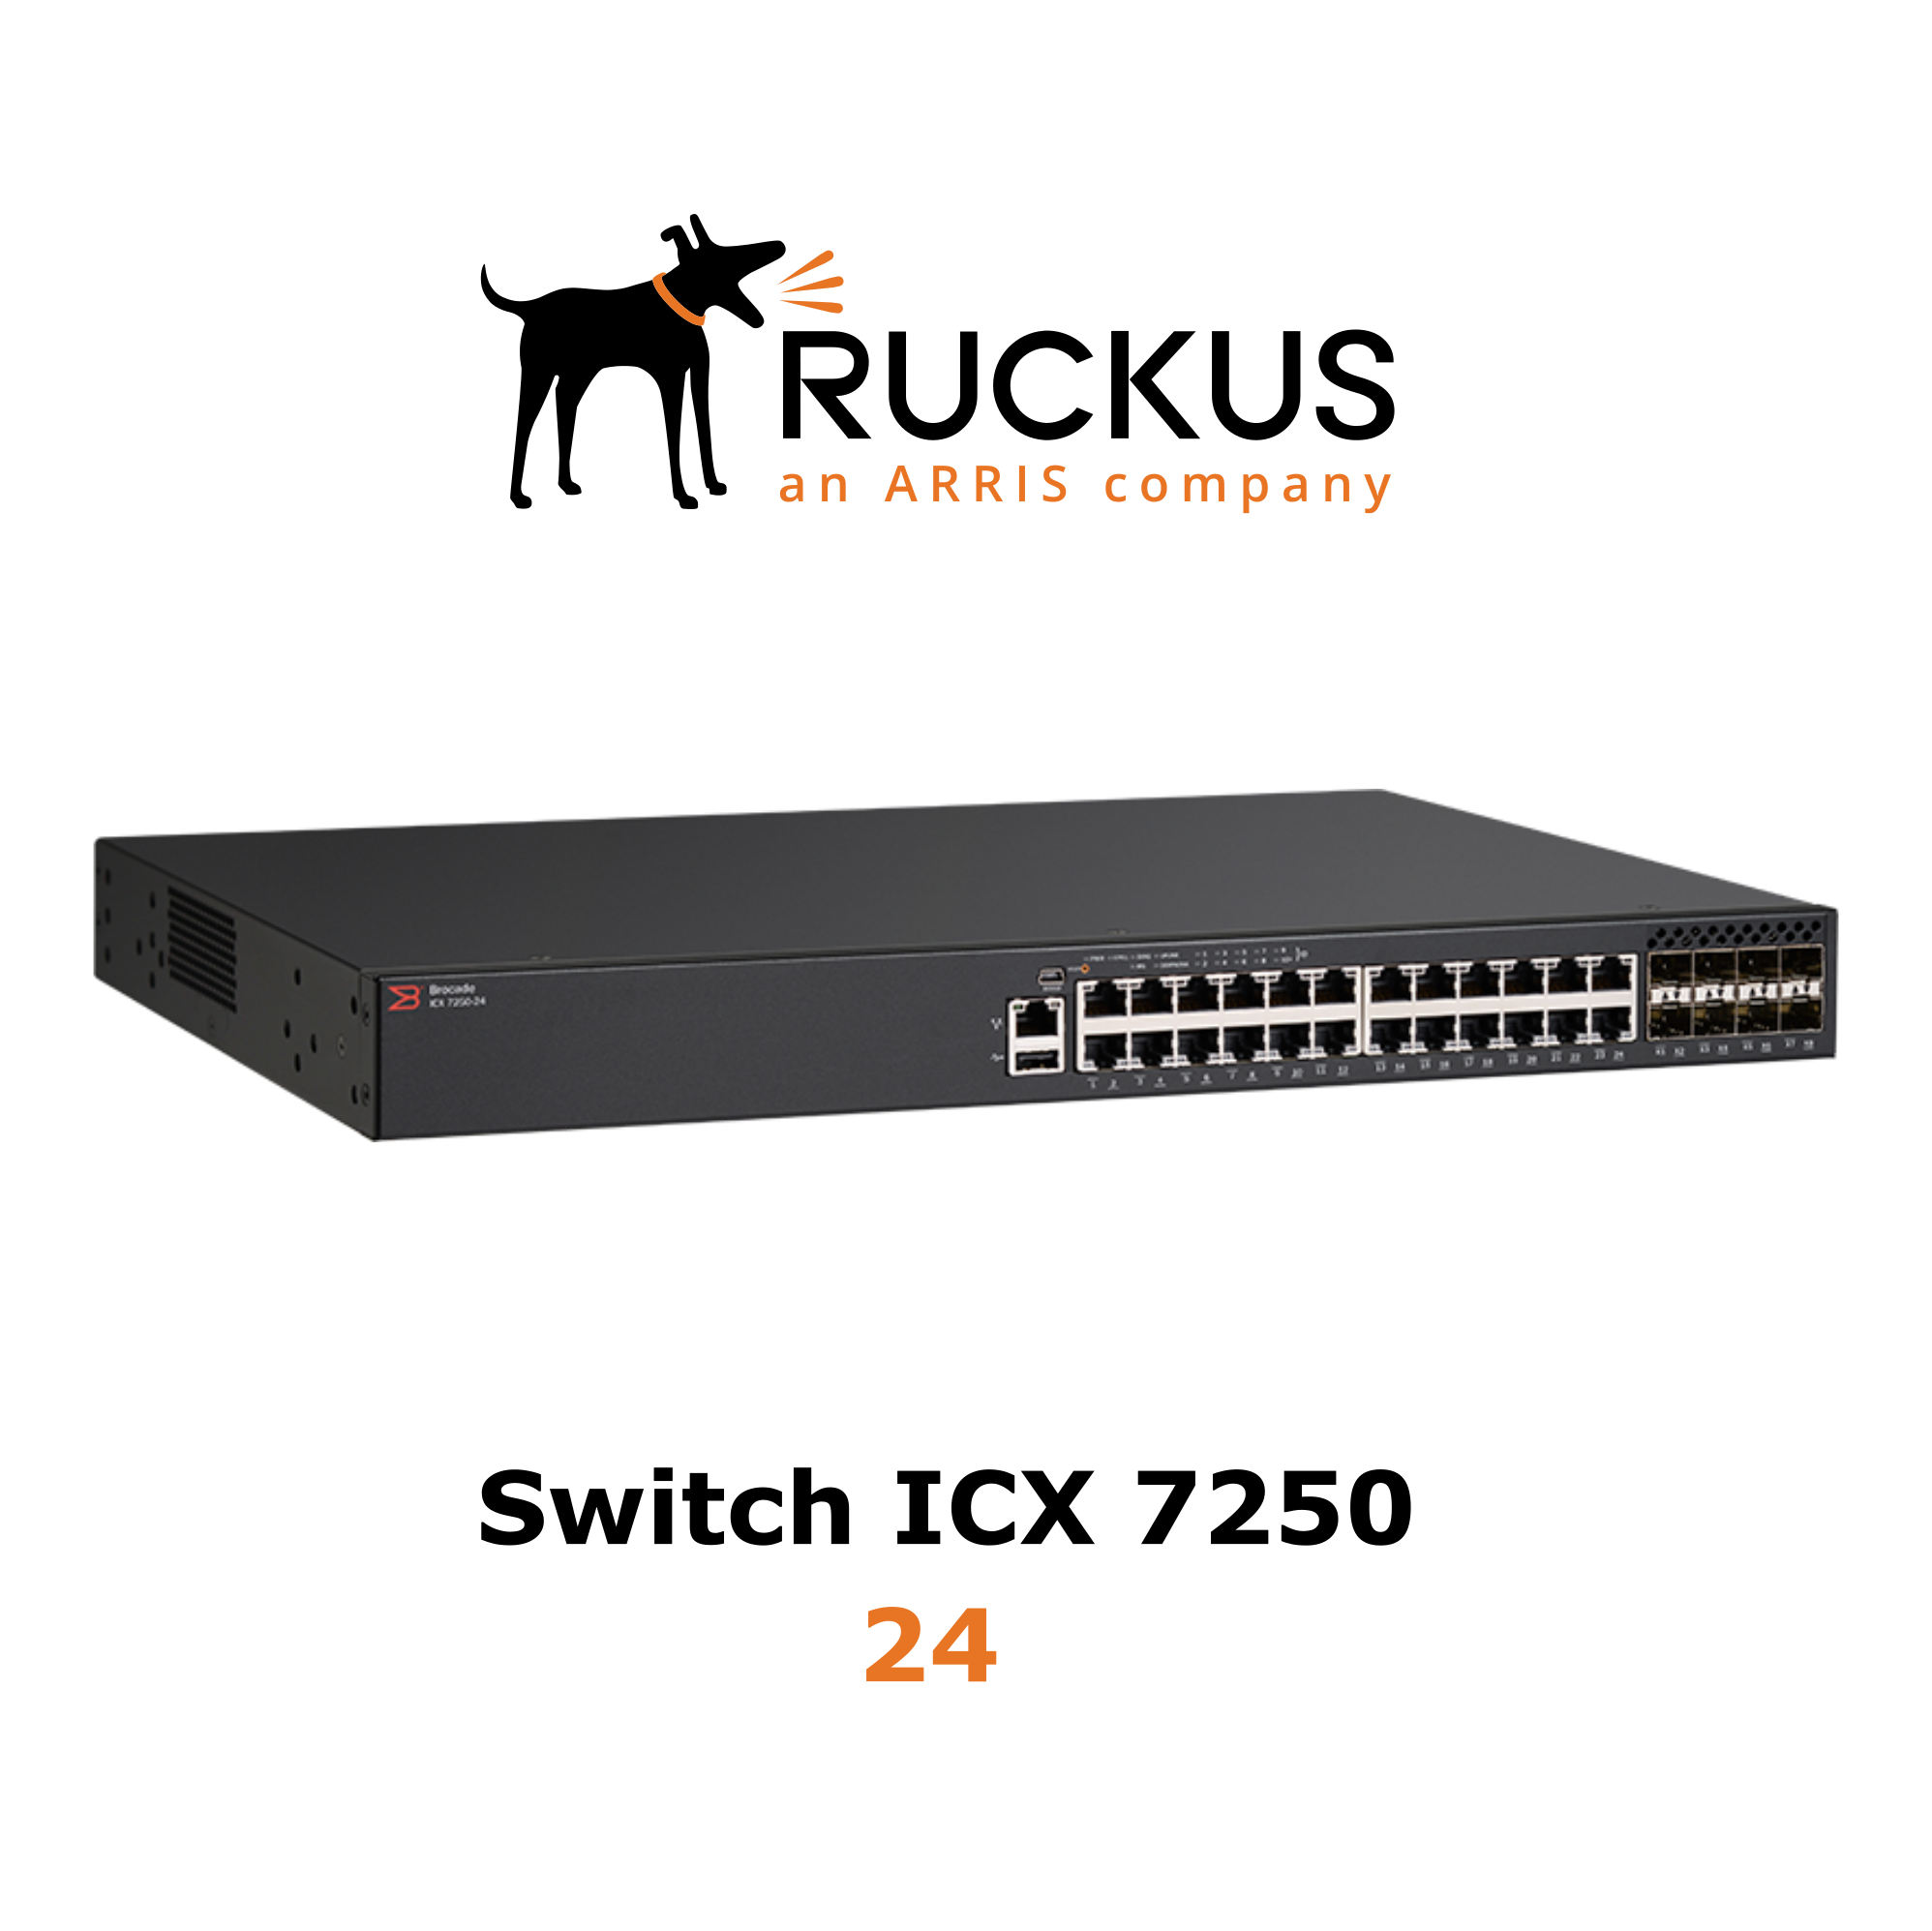 Ruckus ICX 7250-24 Switch (End of Sale/Life)